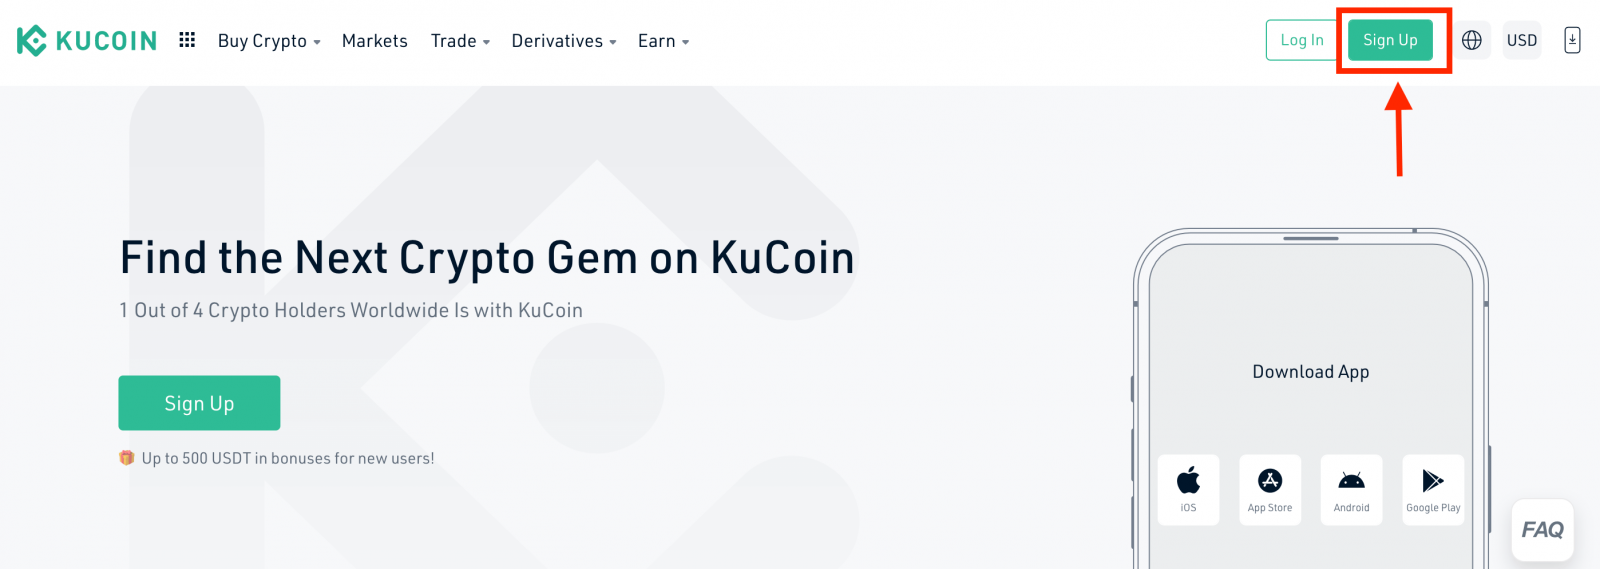 How to Register and Login Account in KuCoin